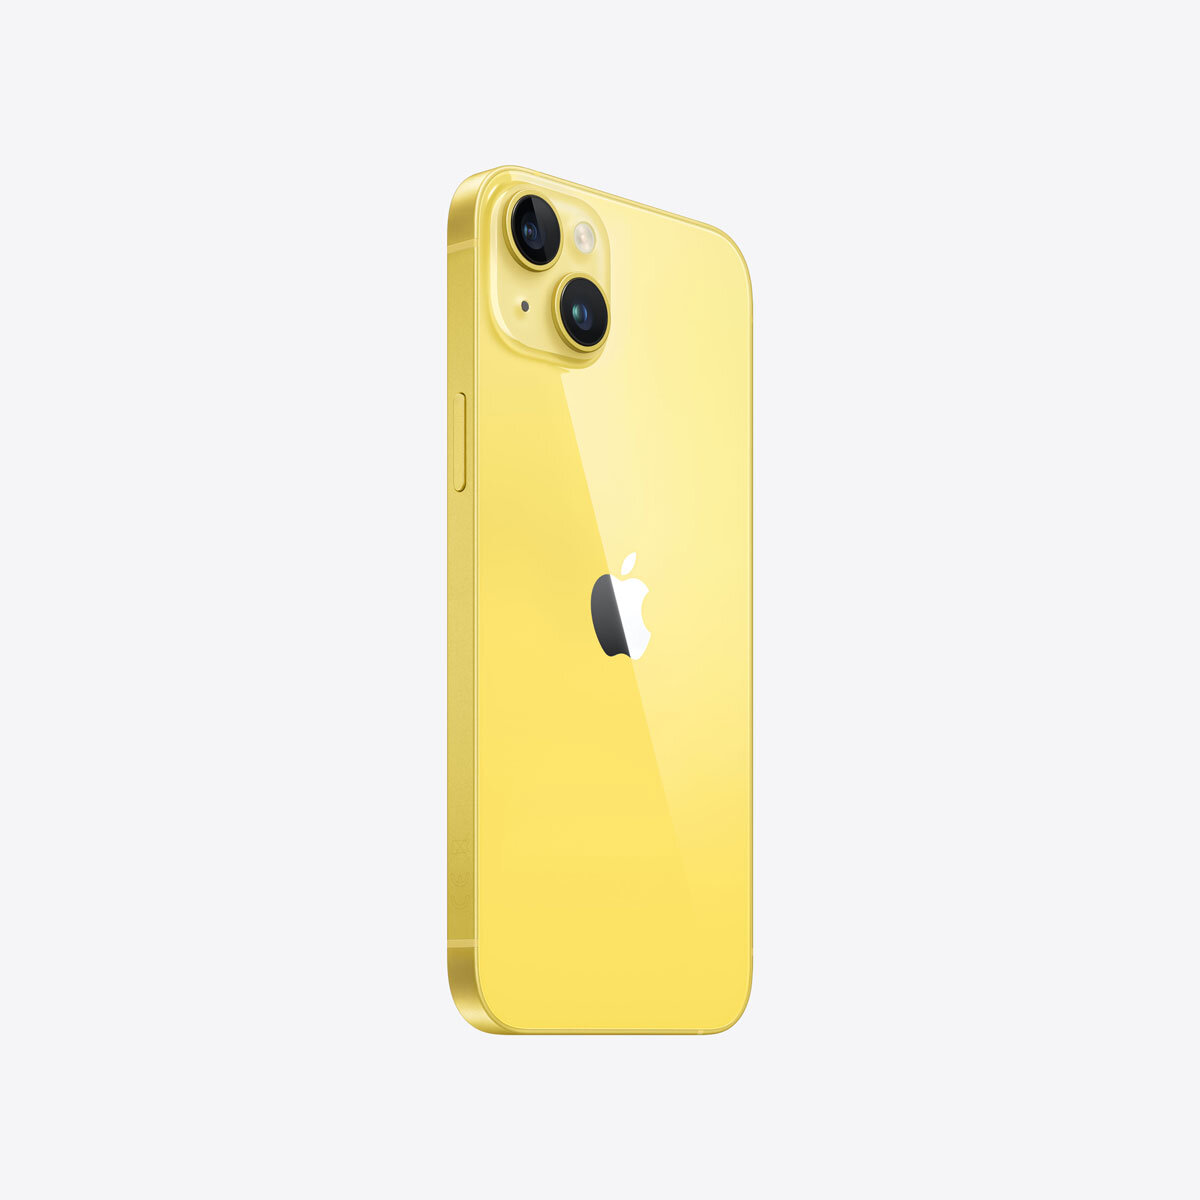 Buy Apple iPhone 14 Plus 128GB Sim Free Mobile Phone in Yellow, MR693ZD/A